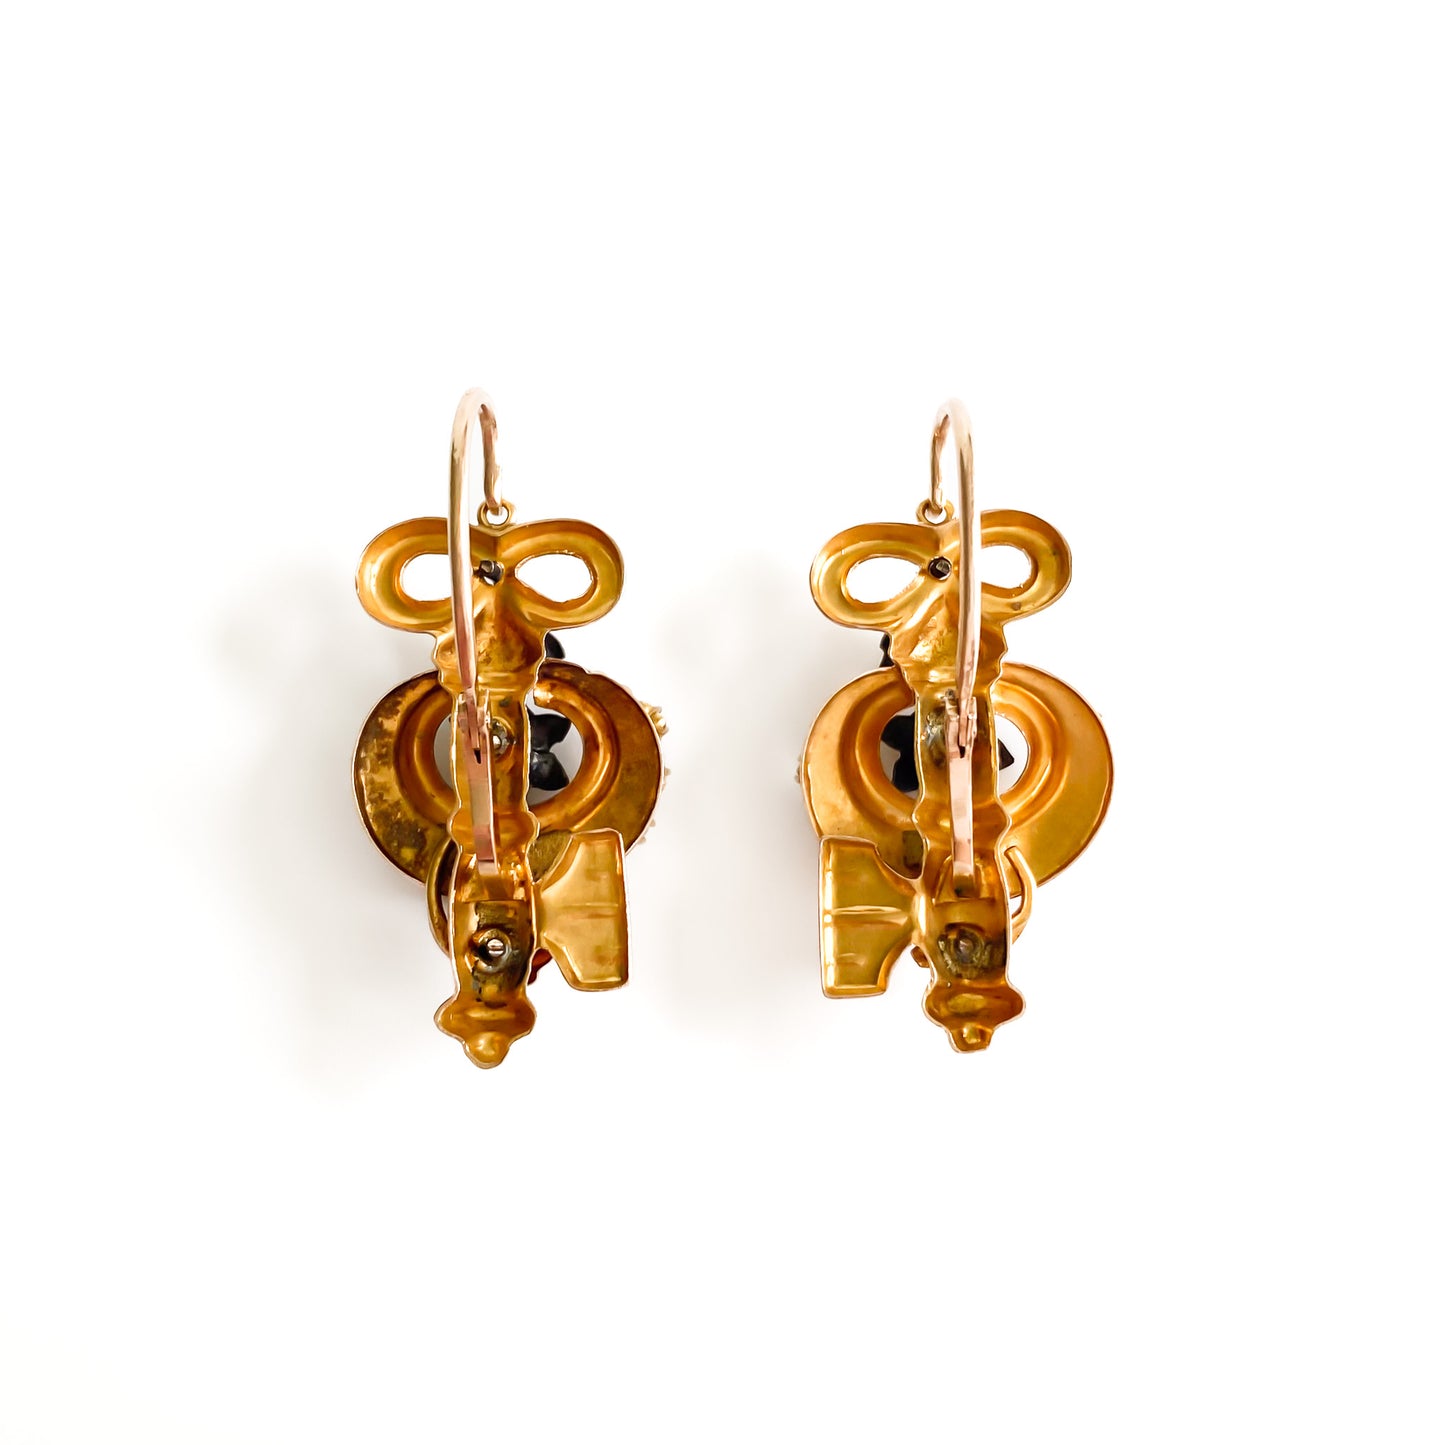 Exquisite Victorian rose and yellow gold earrings each set with ten tiny seed pearls. Front fastening shepherd hooks.